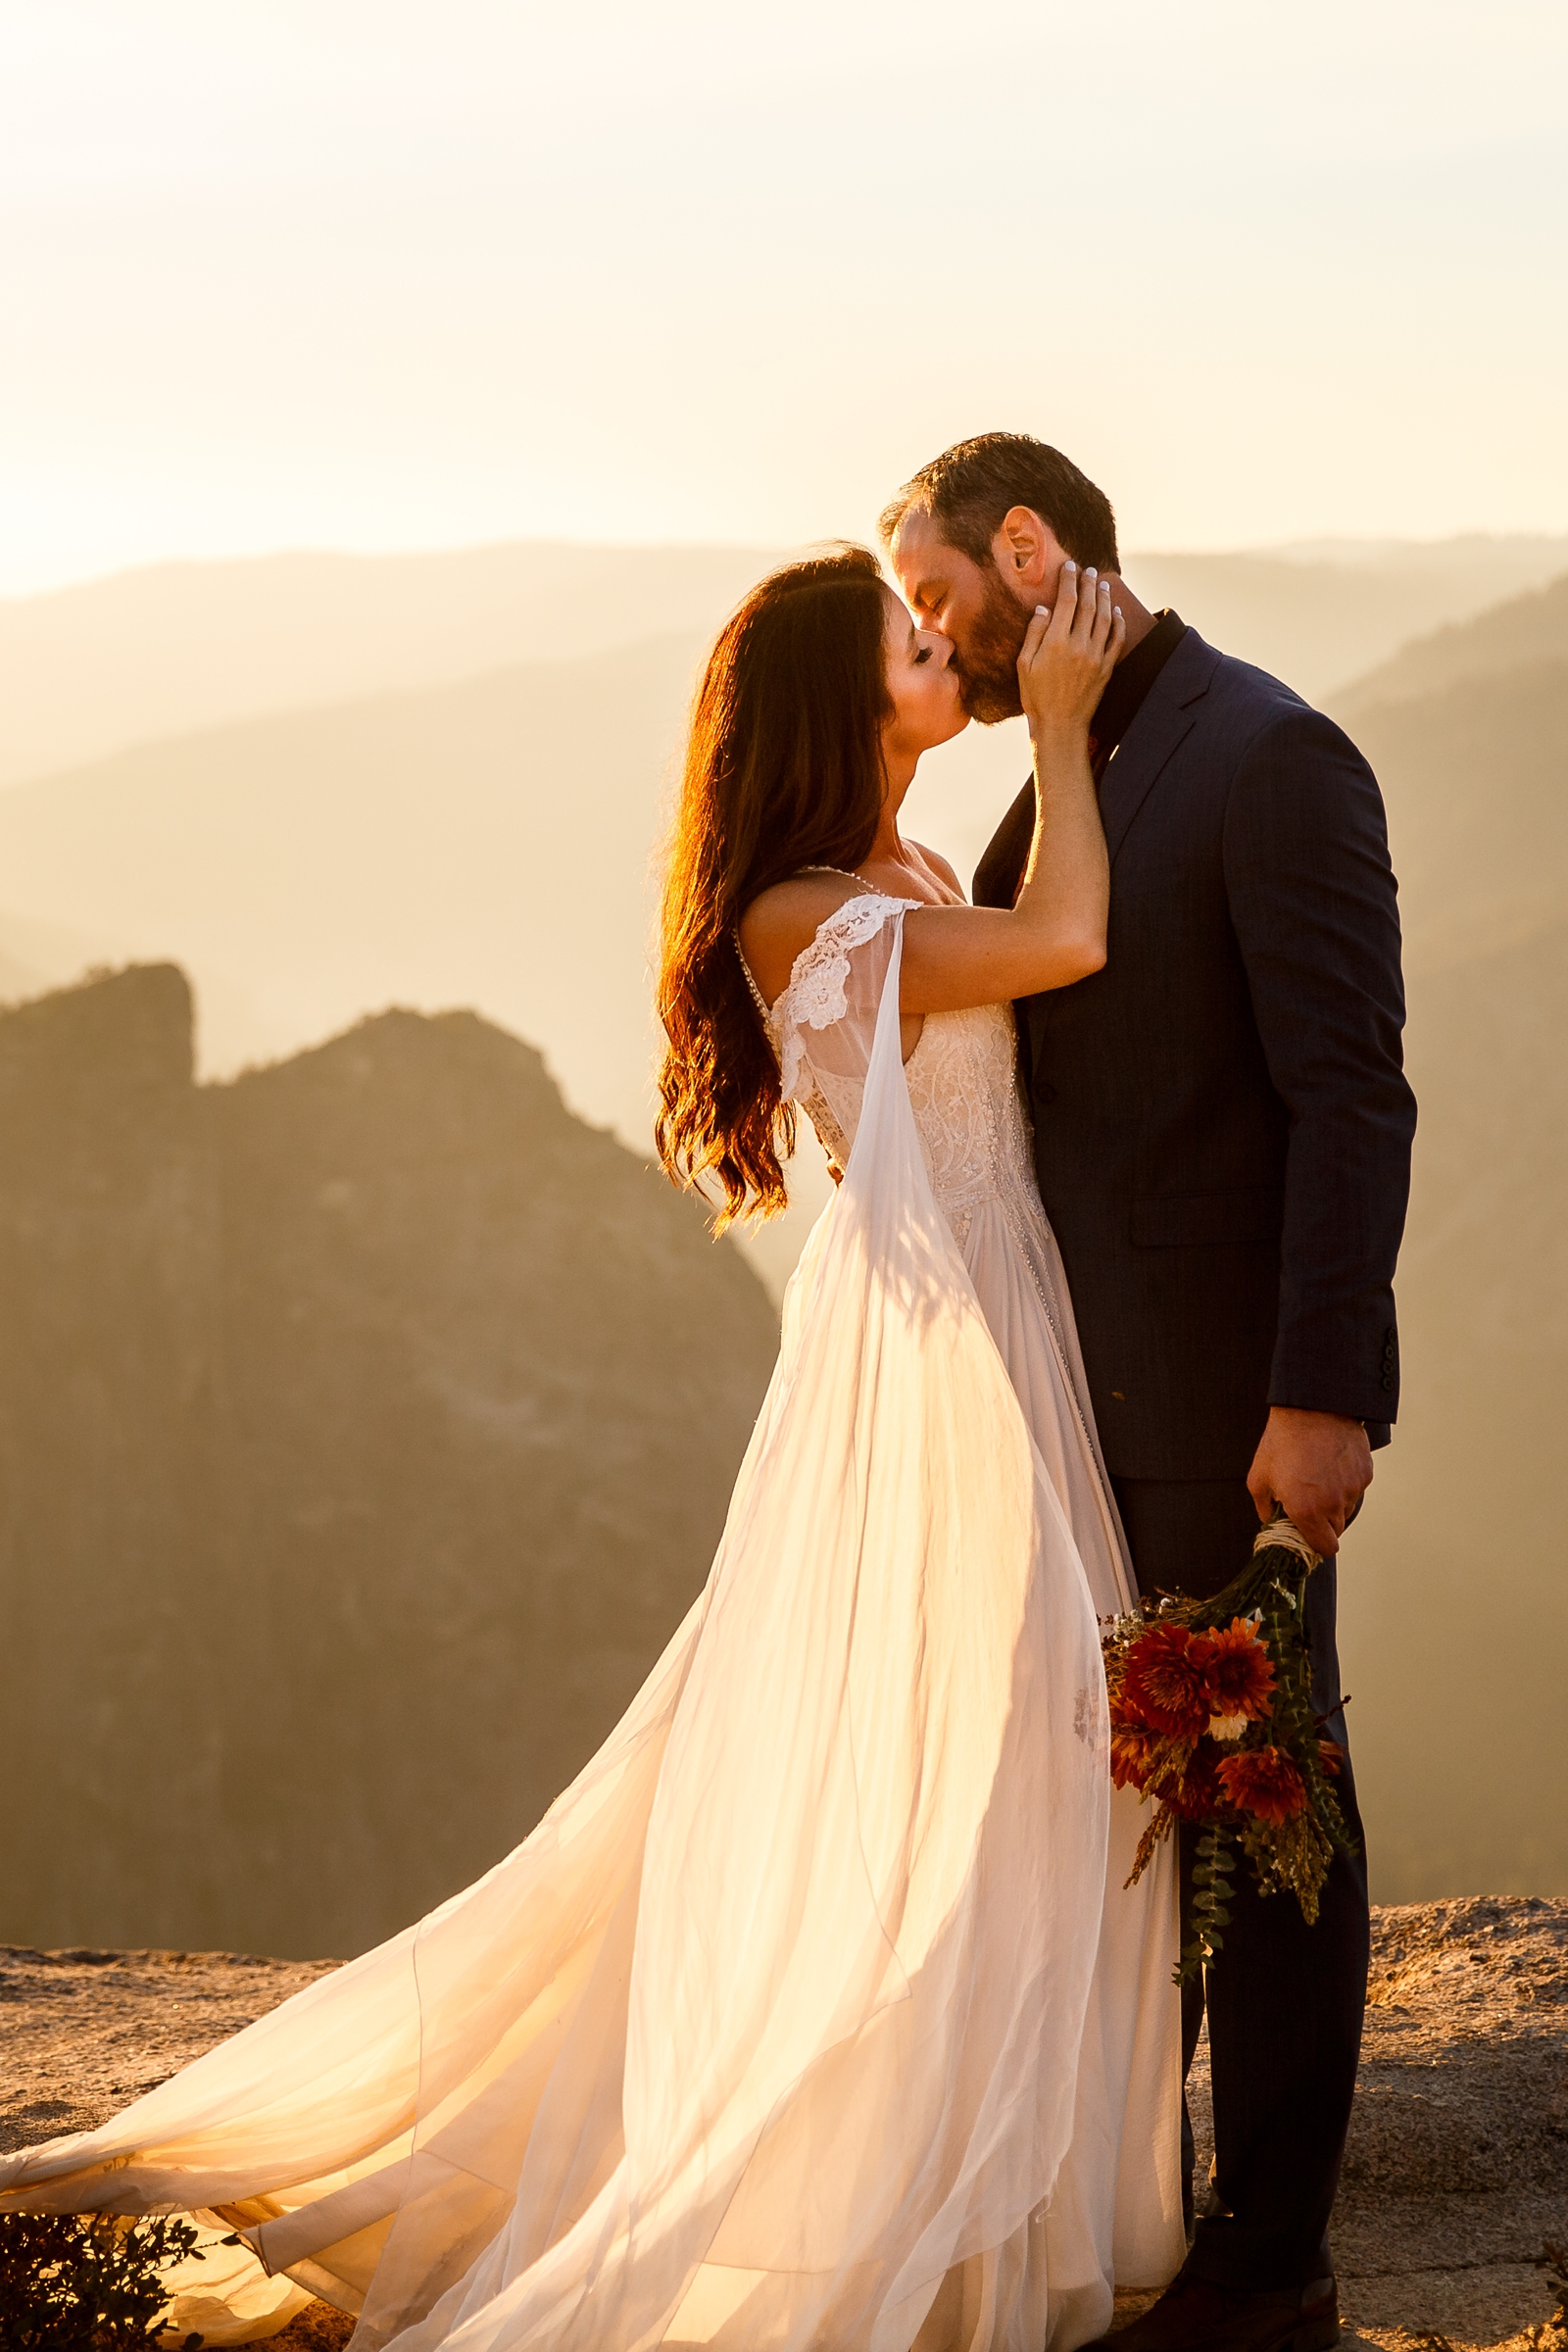 Dreamy bride and groom kissing at sunset in Yosemite high country.